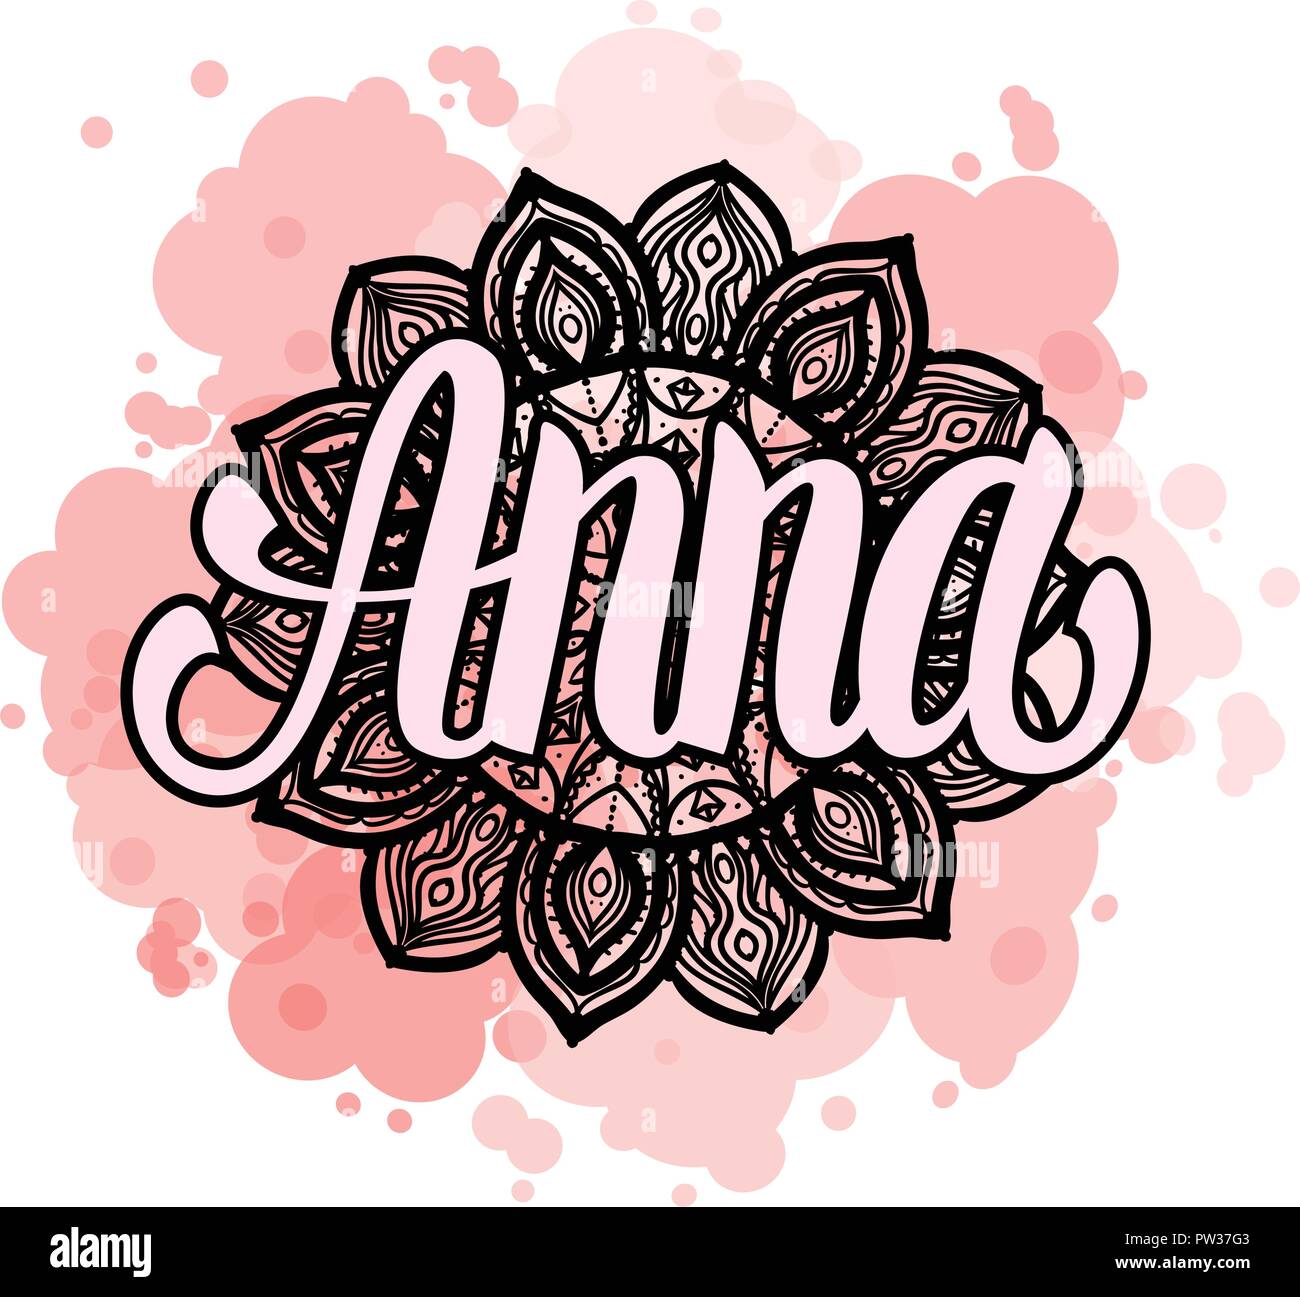 Lettering Female name Anna on bohemian hand drawn frame mandala pattern and trend color stained. Vector illustration fashion style print isolated on white background. Stock Vector